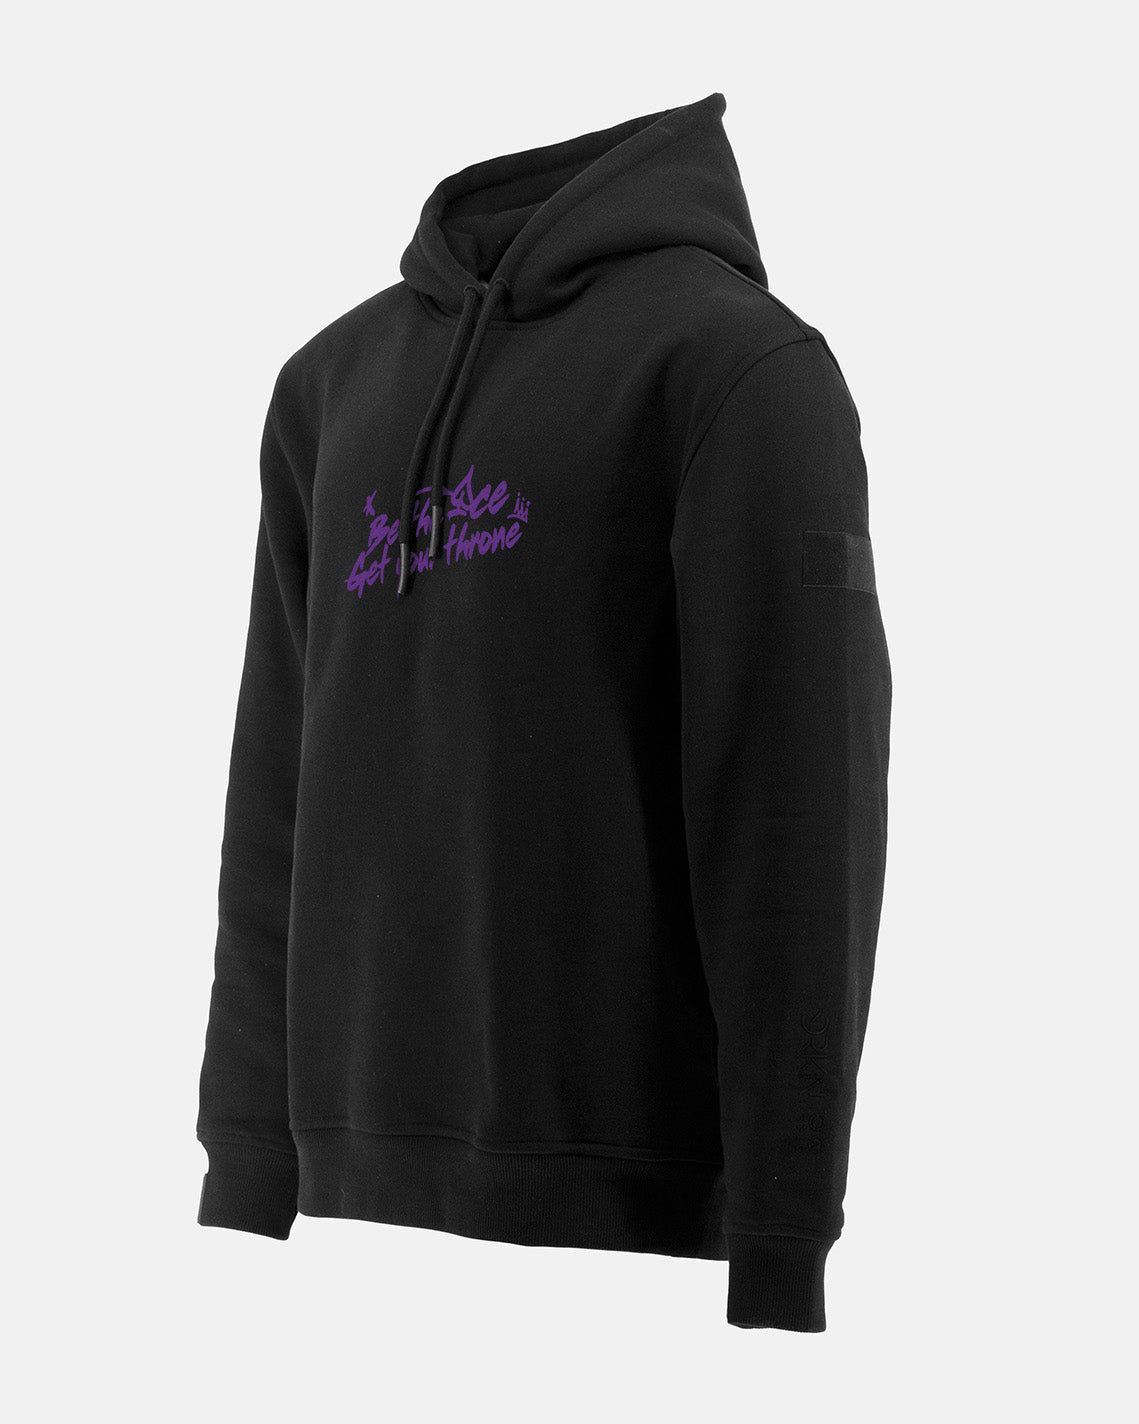 The Official PGC 2022 Black Hoodie